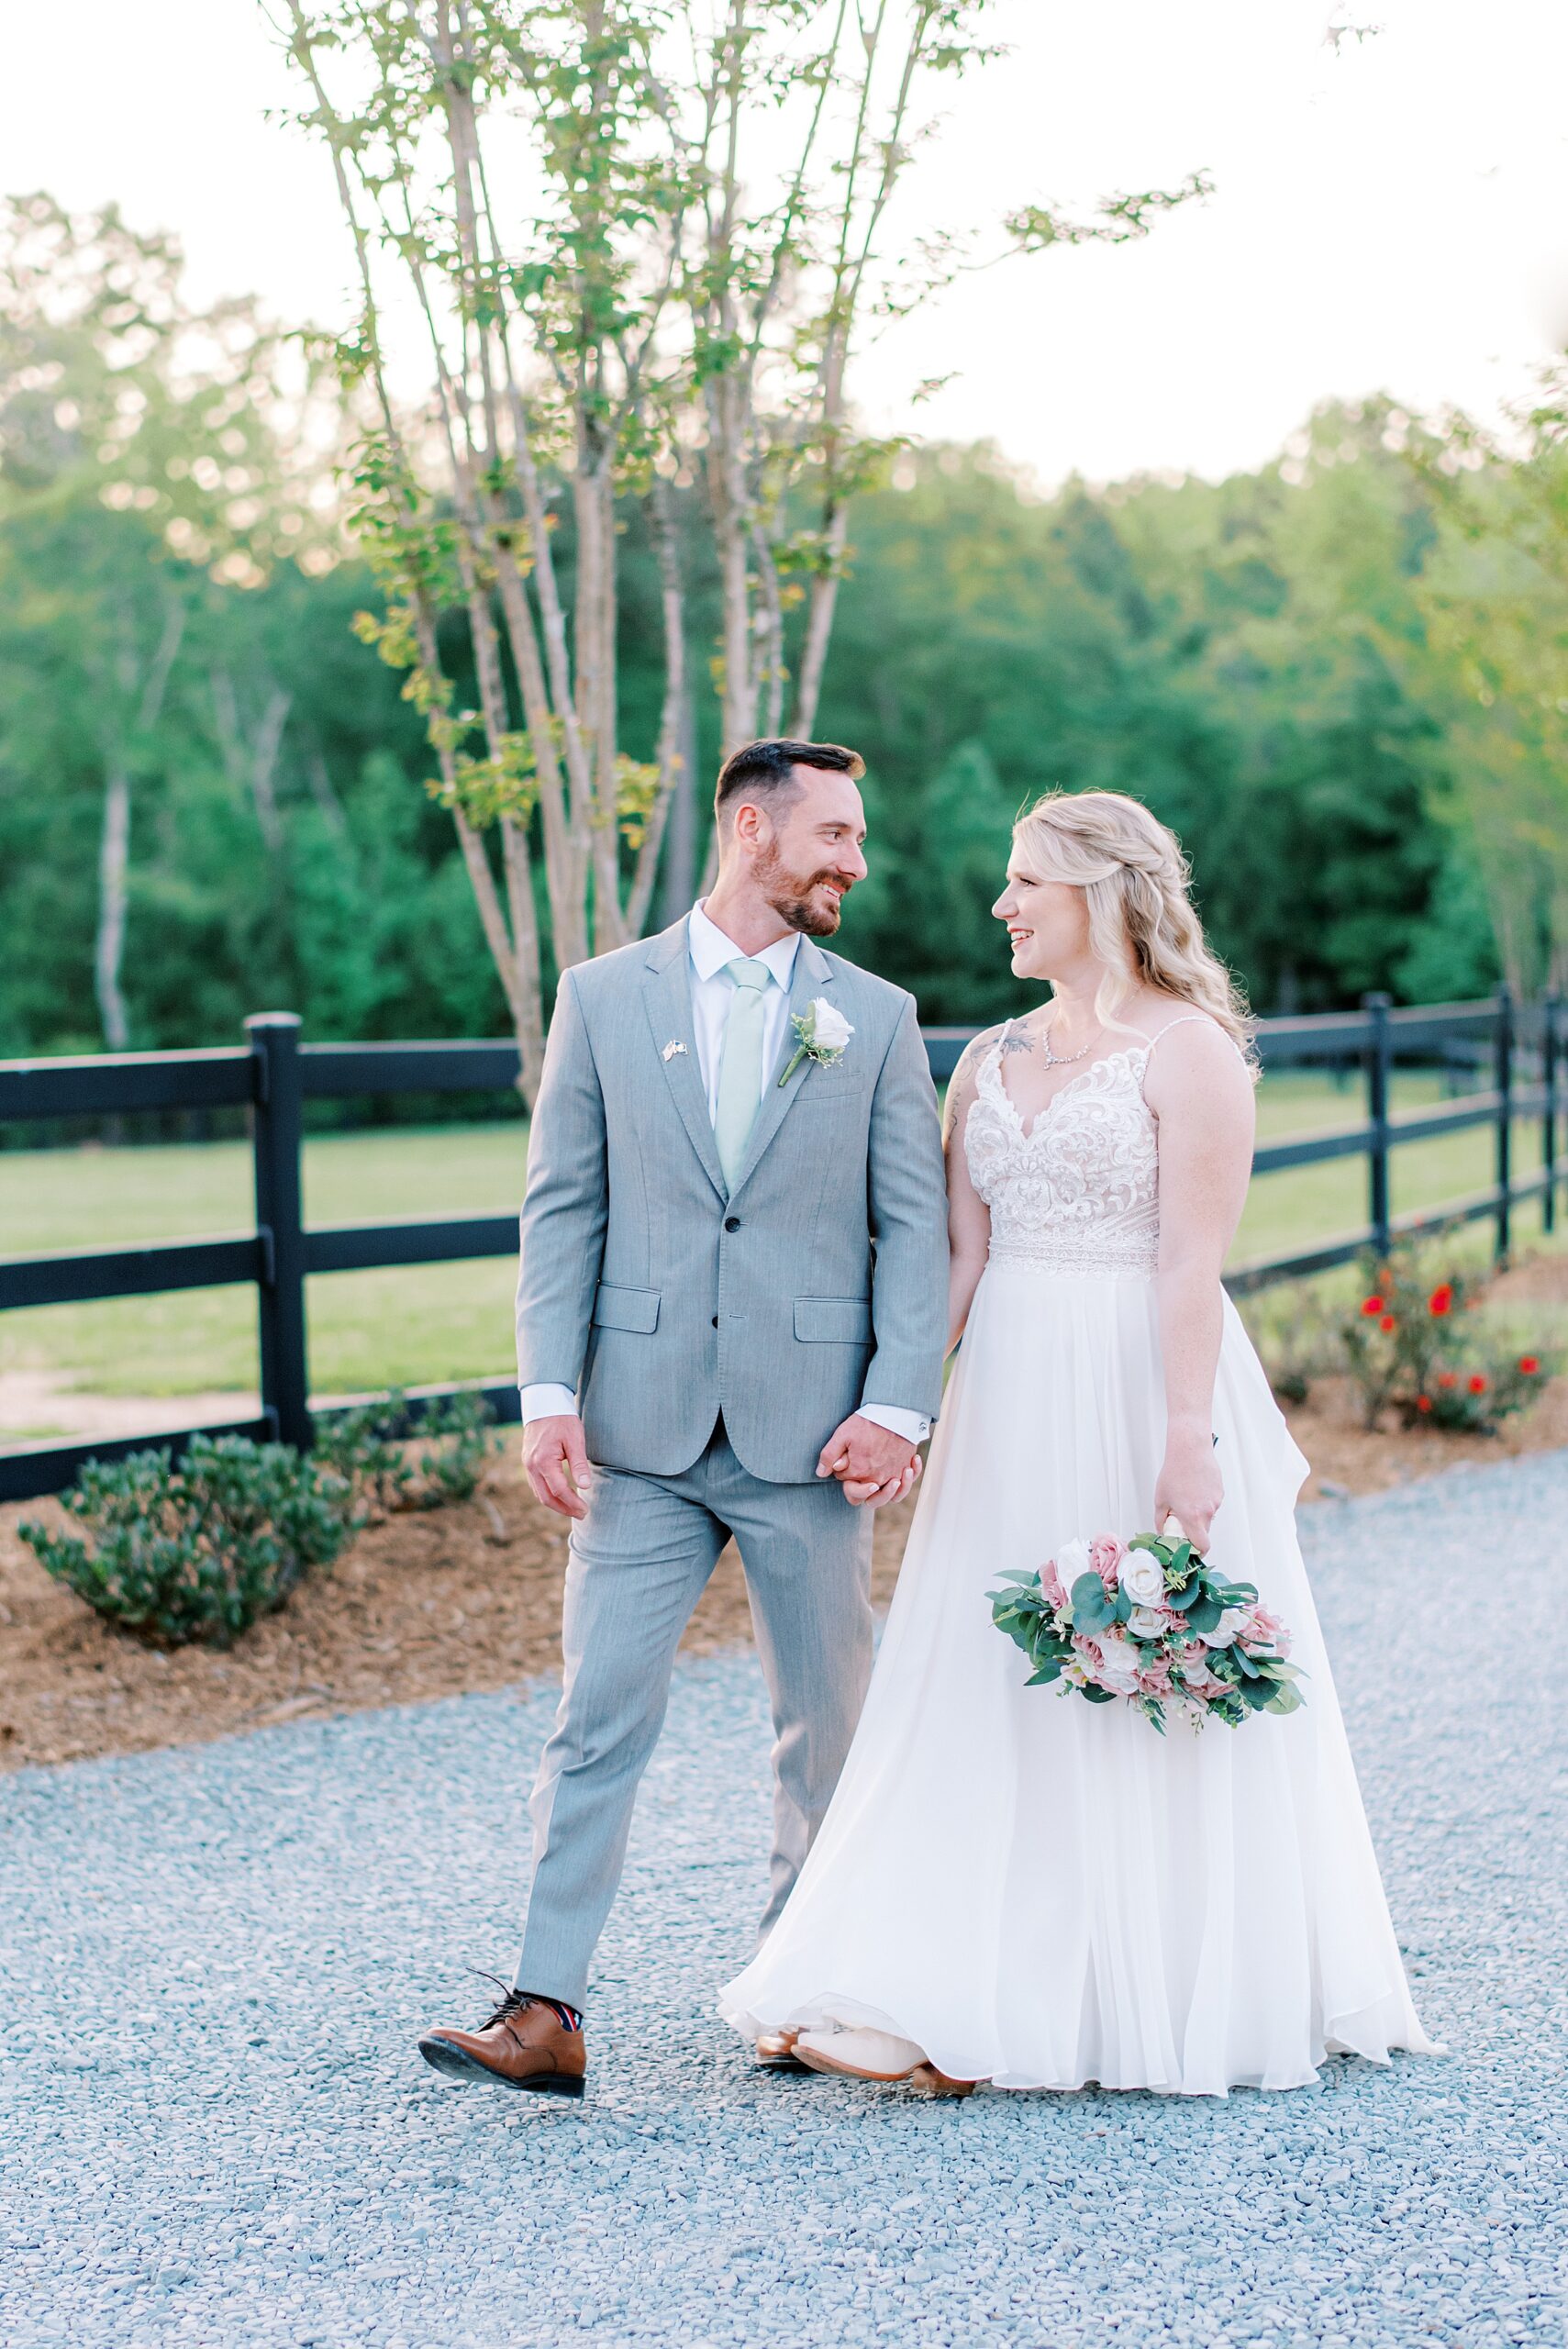 Newlyweds walk holding hands down a gravel path on a farm